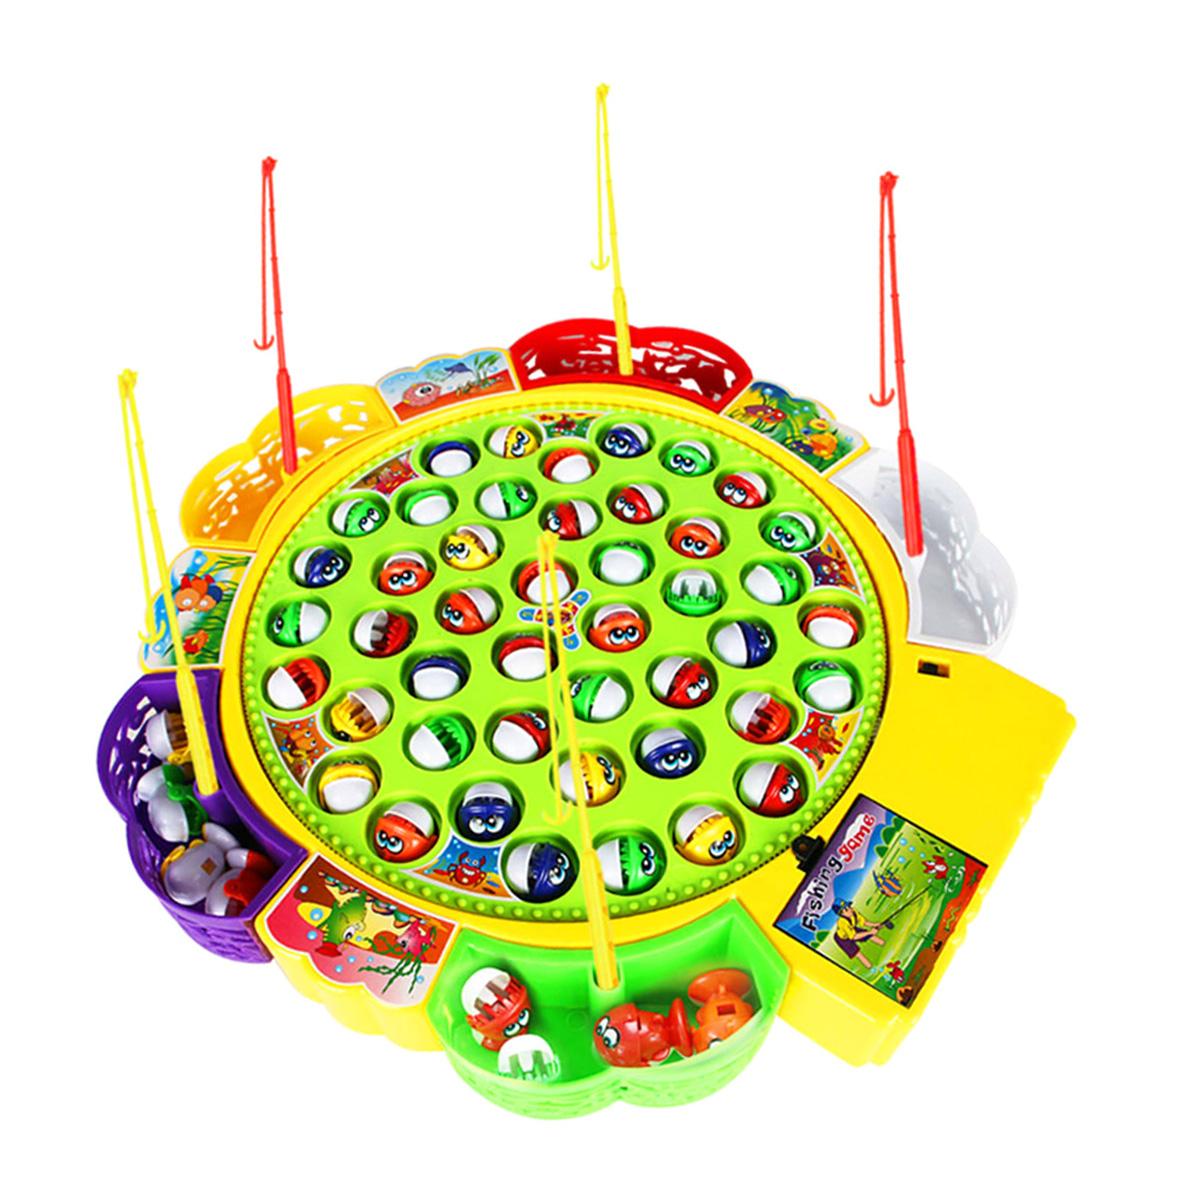 Fishing Fish Game Kids Toy (15 Fishes, 4 Players)